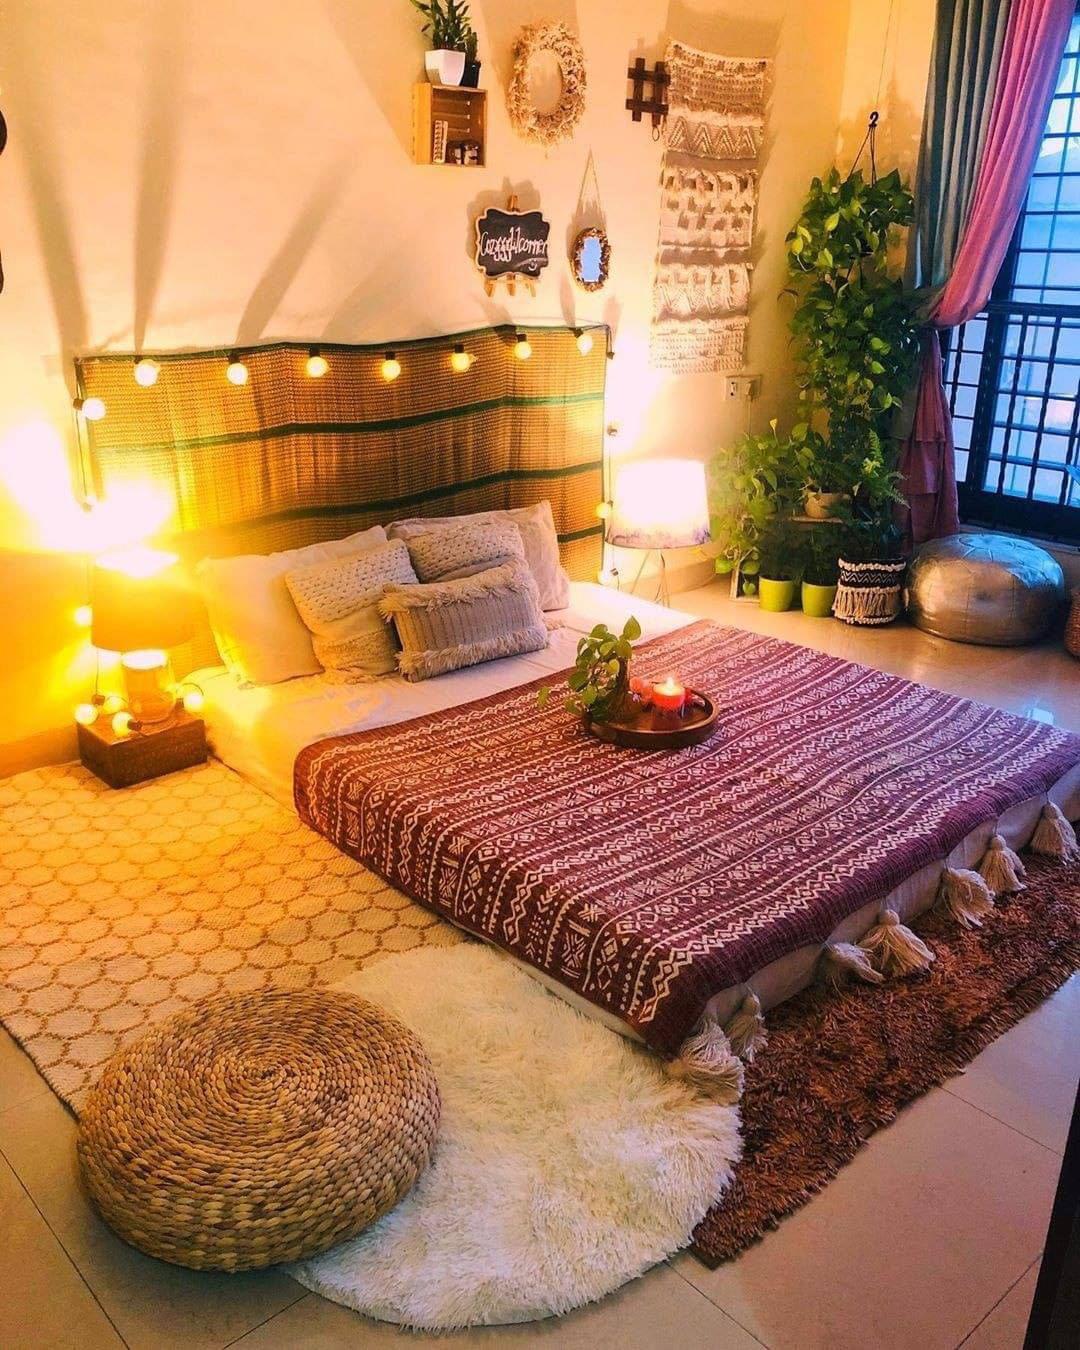 Warm and beauty bedroom